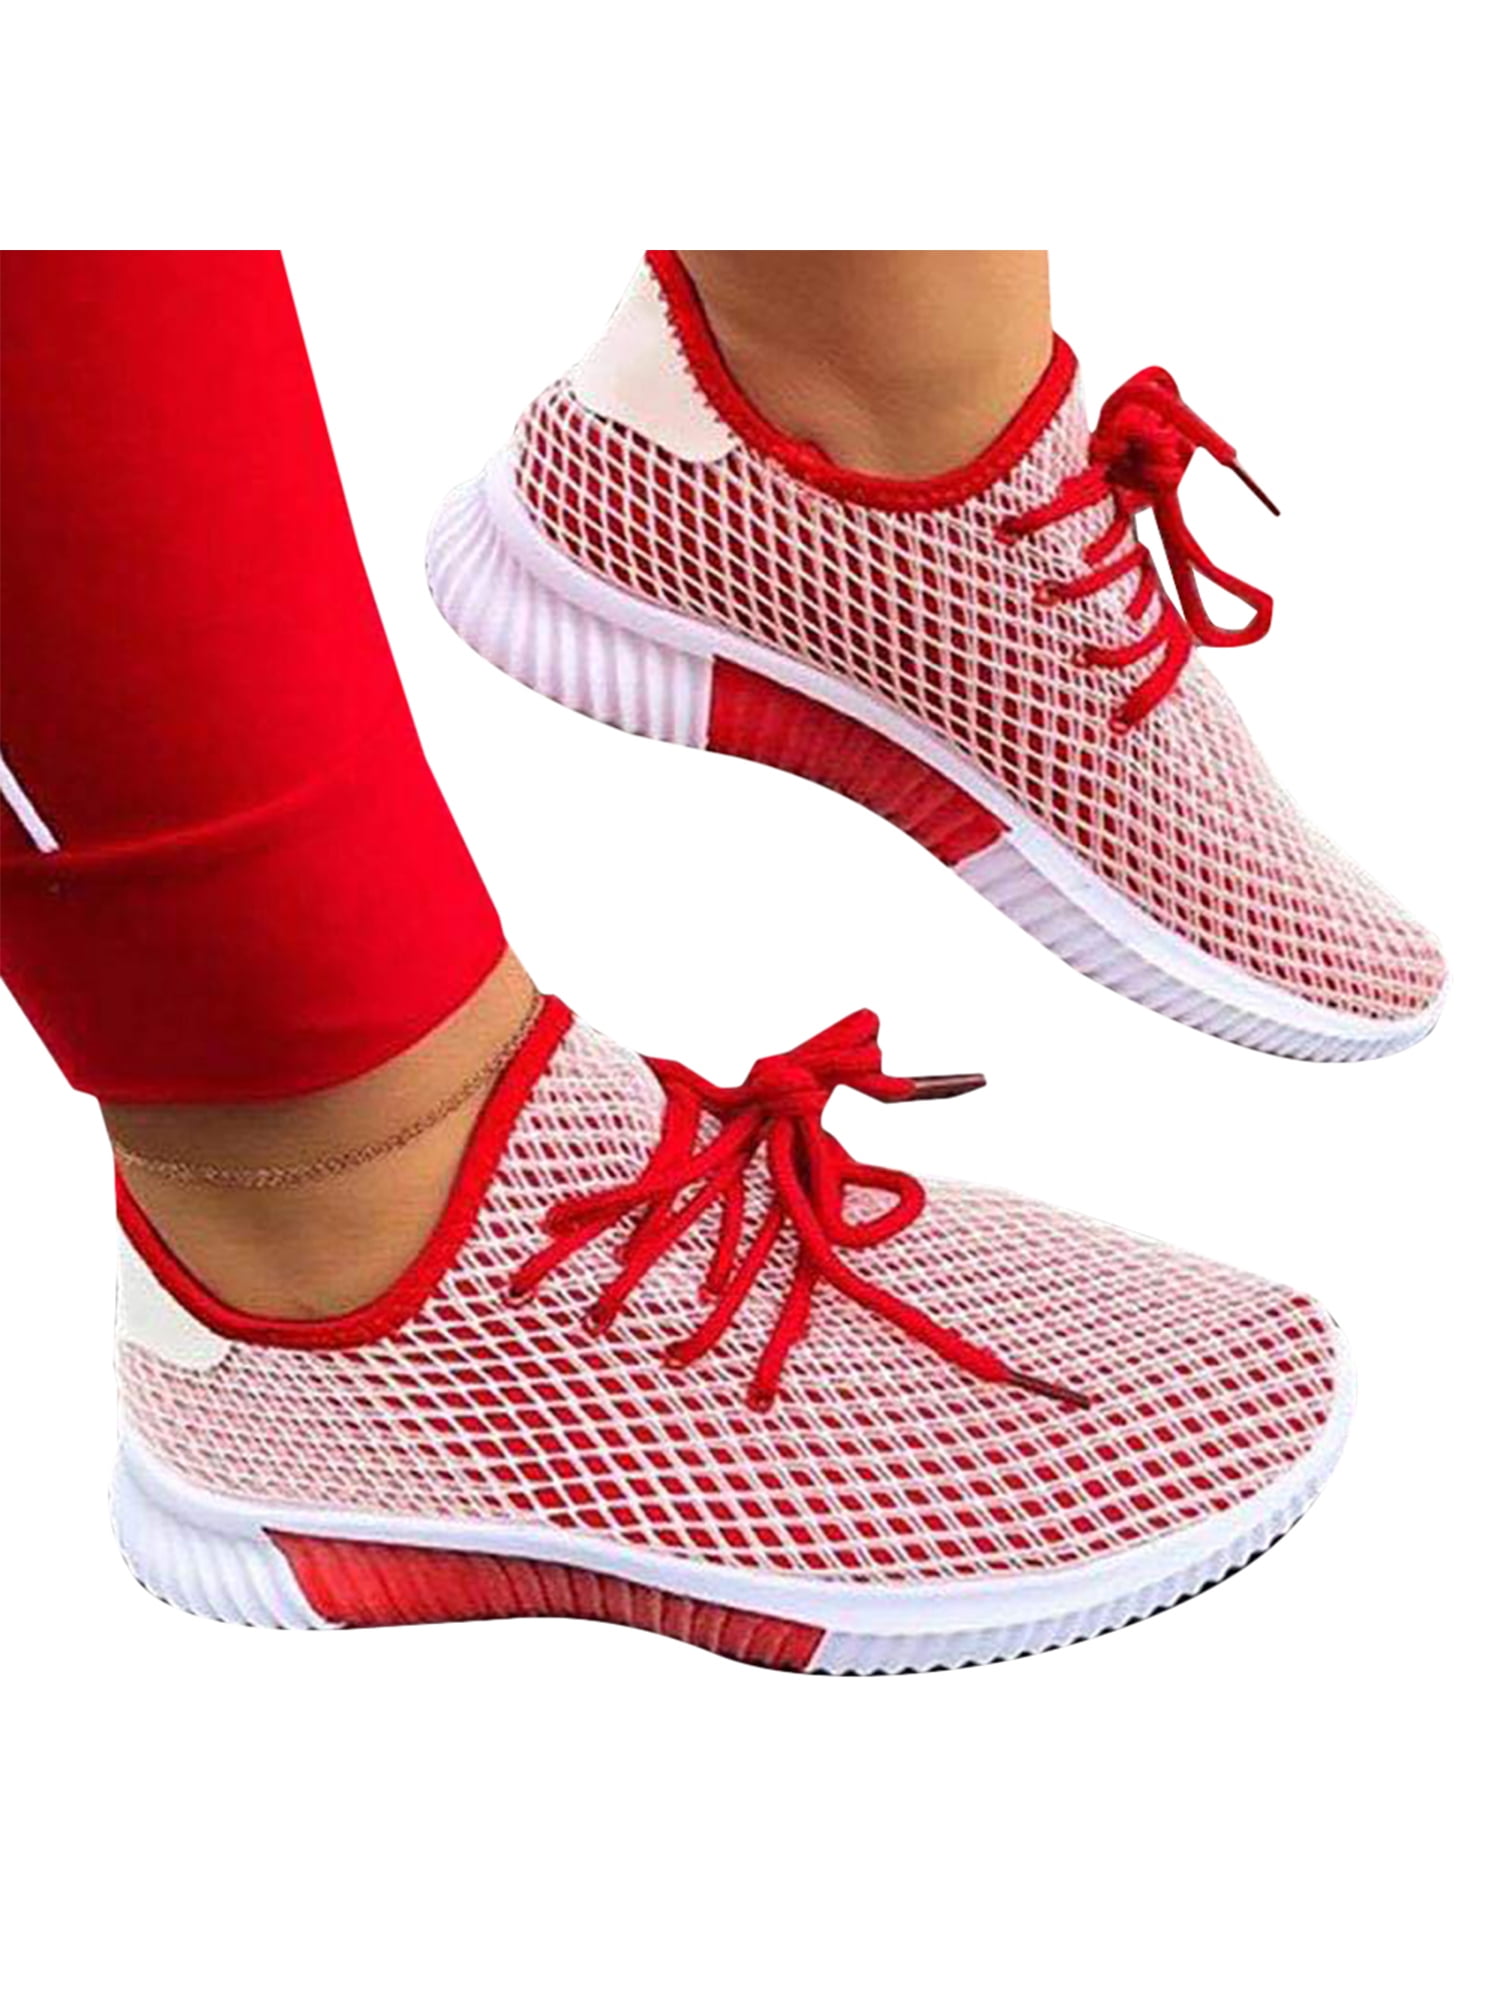 WOMENS LADIES SPORTS RUNNING TRAINERS CHUNKY SNEAKERS PARTY WOMEN SHOES SIZE